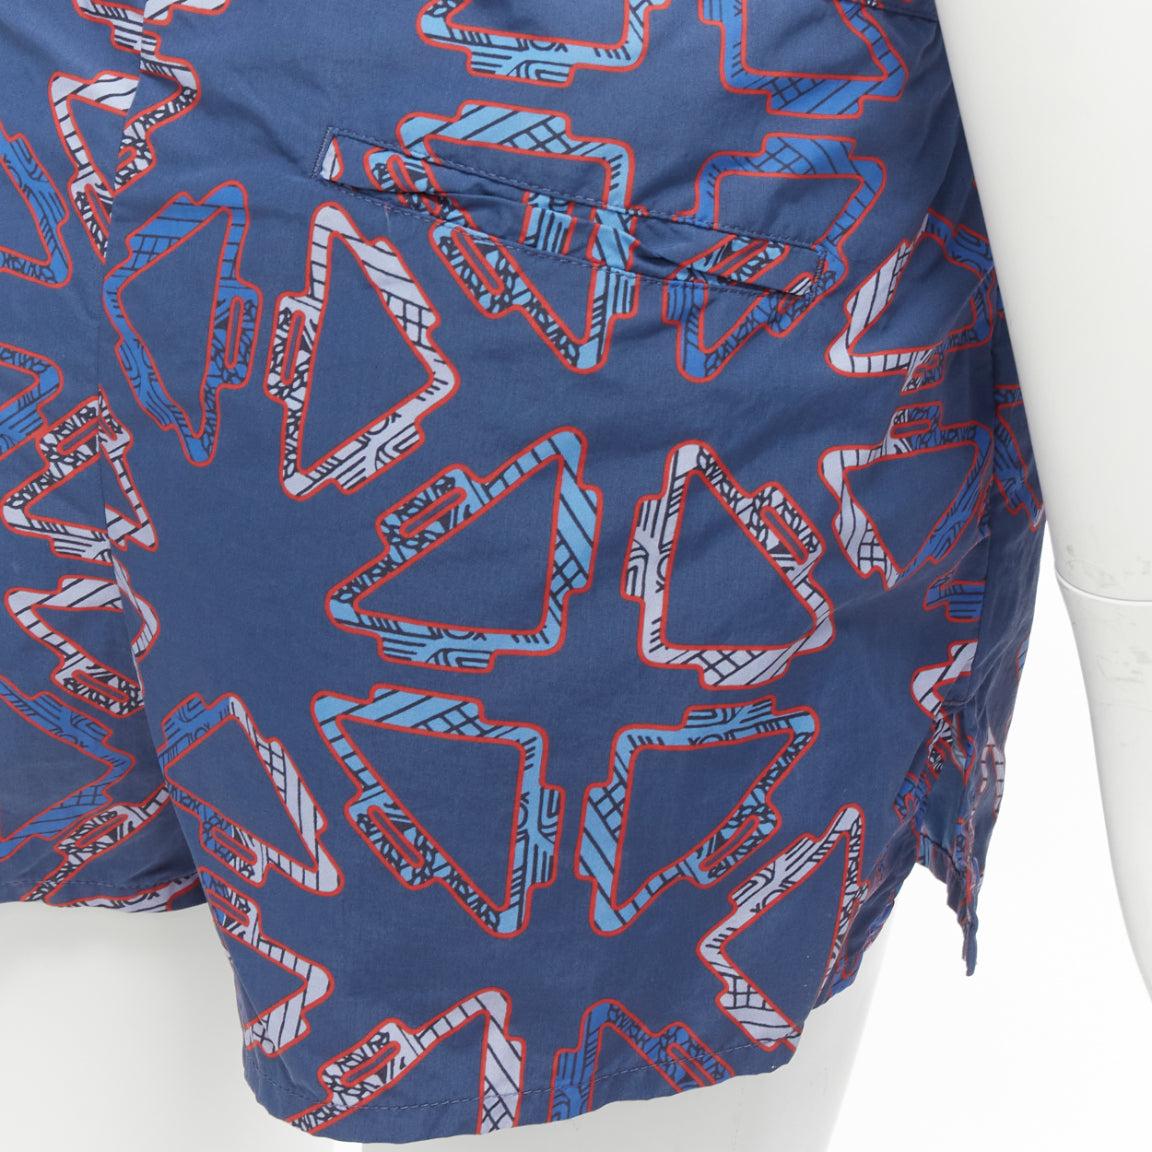 HERMES Tatersales red geometric print drawstring swimming shorts FR38 M
Reference: KYCG/A00053
Brand: Hermes
Model: Tatersales
Material: Polyamide
Color: Navy
Pattern: Geometric
Closure: Drawstring
Extra Details: Beach shorts in 